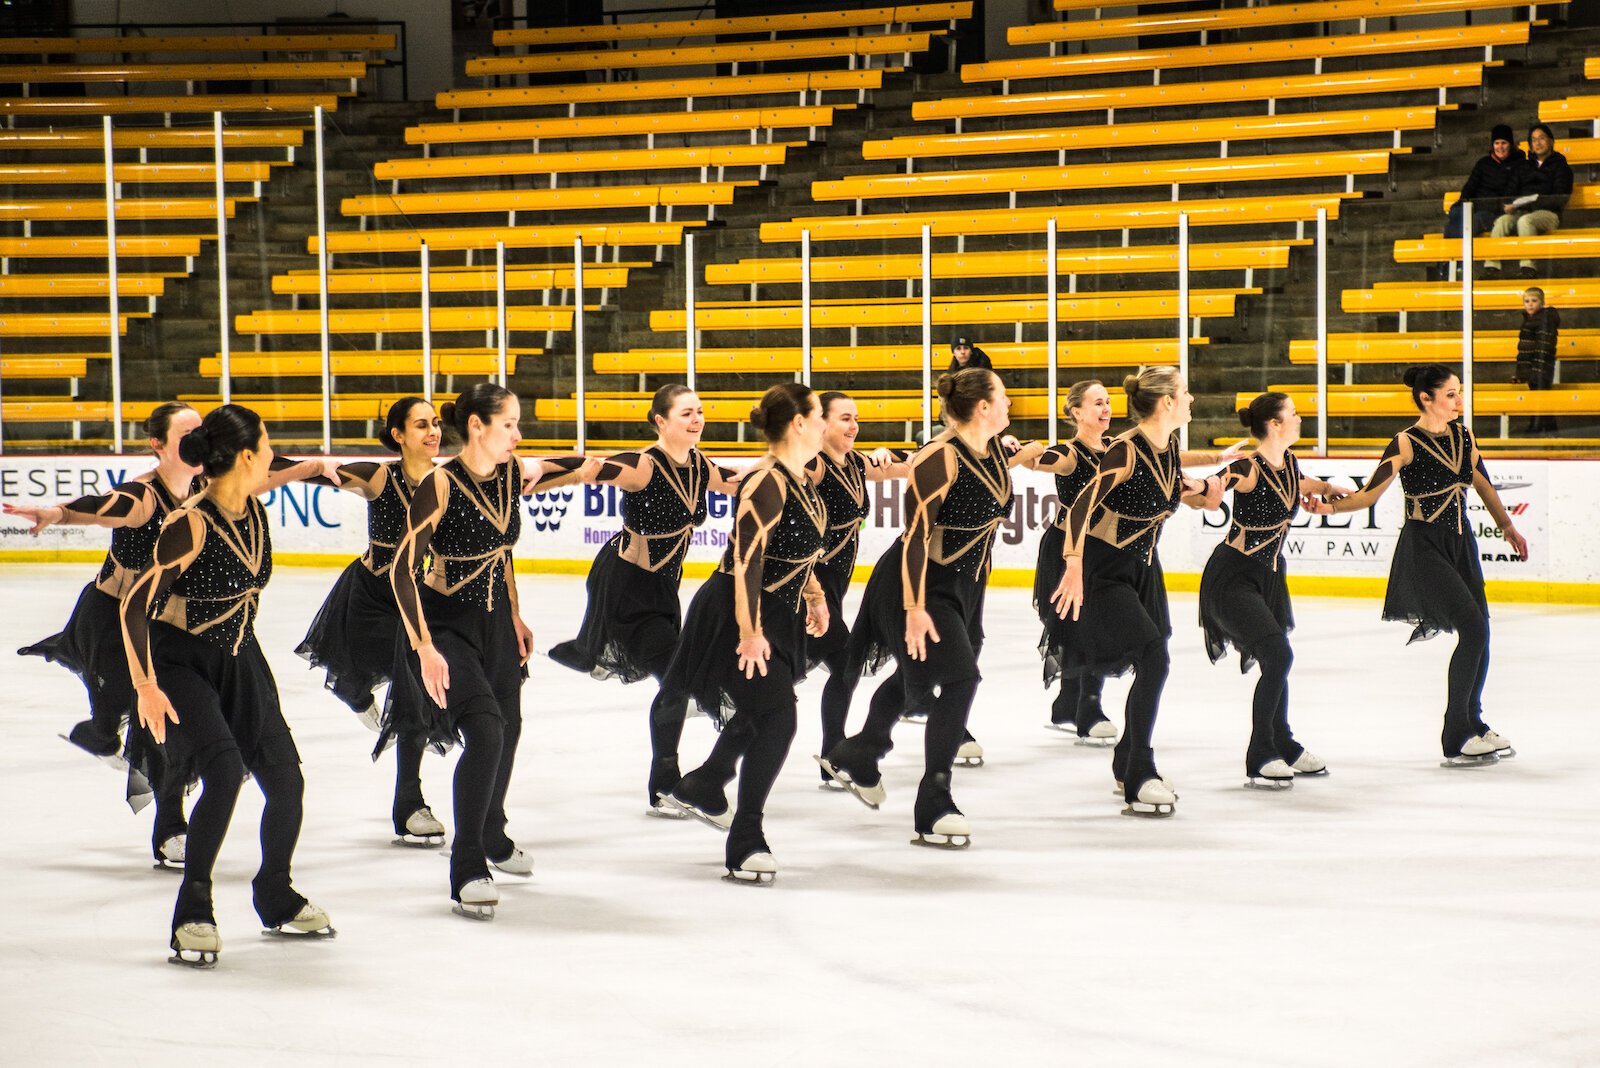 Synchro-skating has some affinities with the performances of well-known commercial teams like Disney on Ice and Ice Capades. 